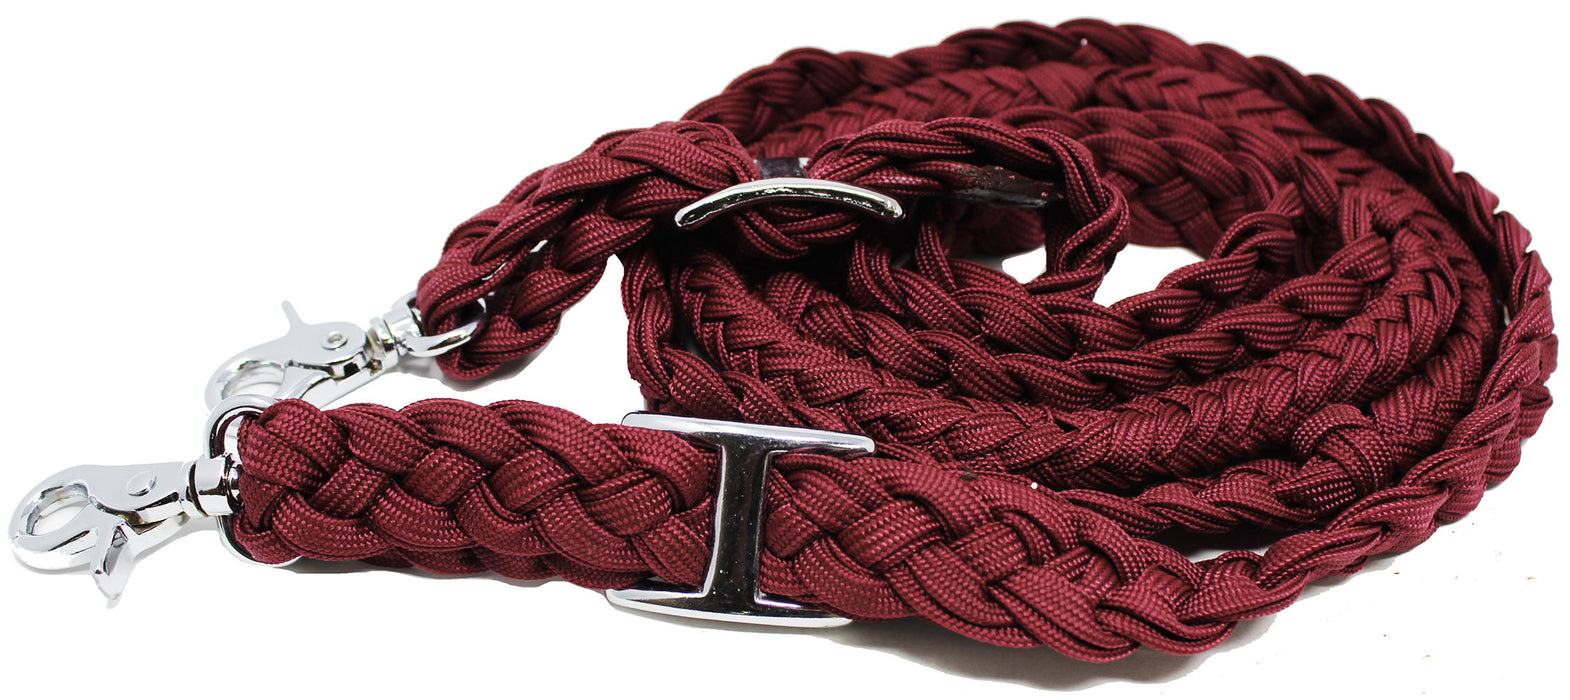 Roping Knotted Horse Tack Western Barrel Reins Nylon Braided Burgundy 8ft 607167